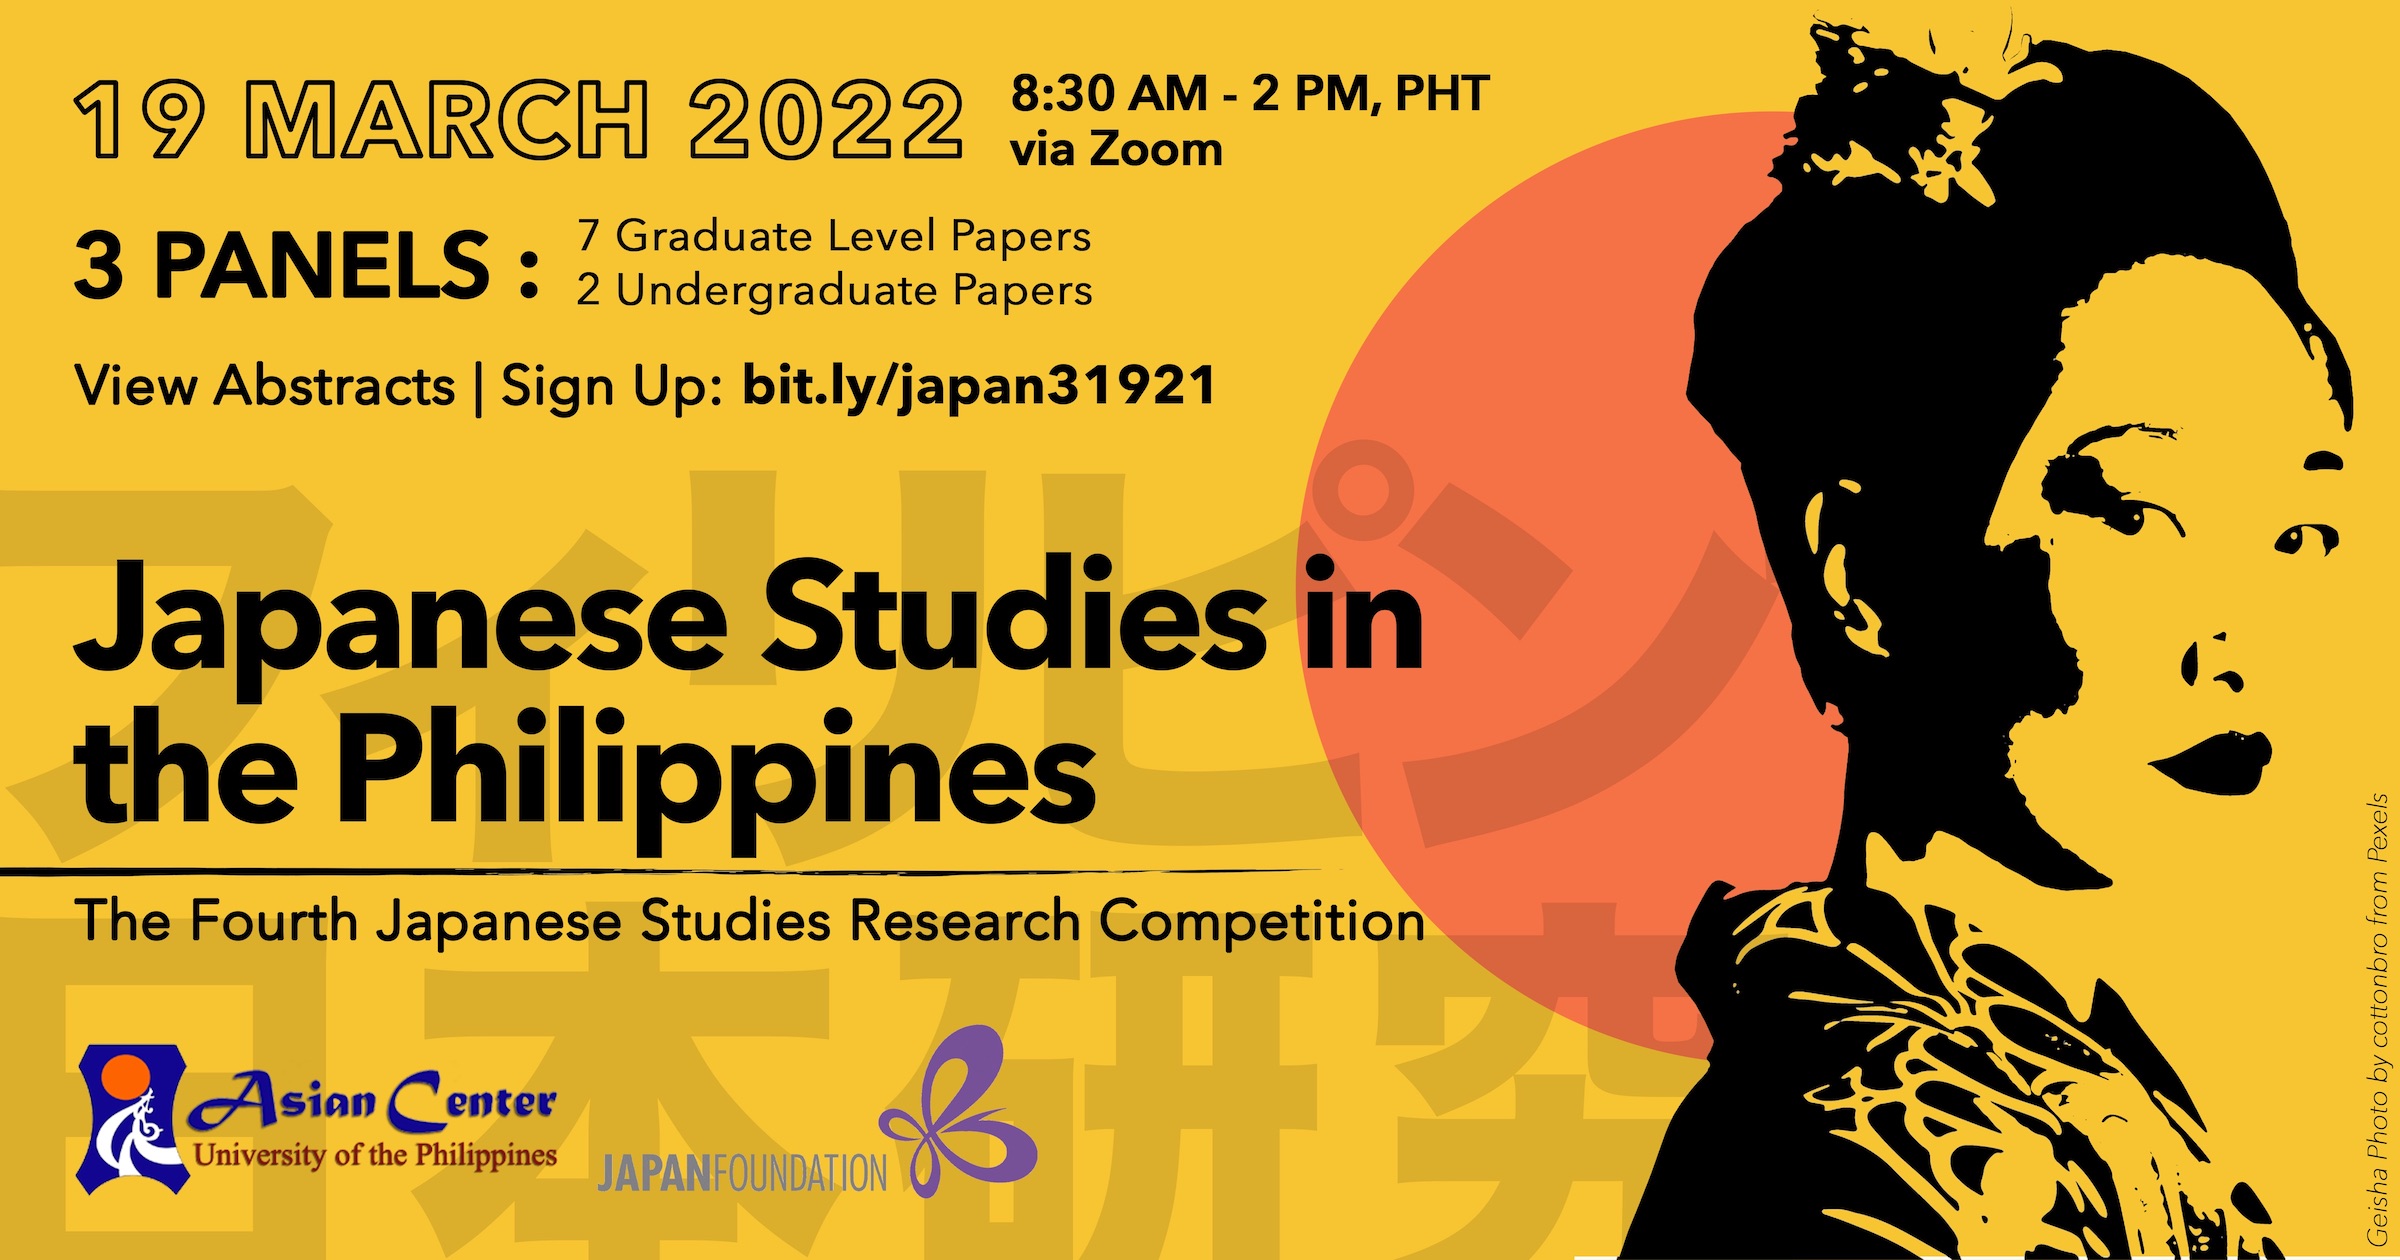 The Fourth Japanese Studies in the Philippines Research Competition: A Forum (19 March 2022)